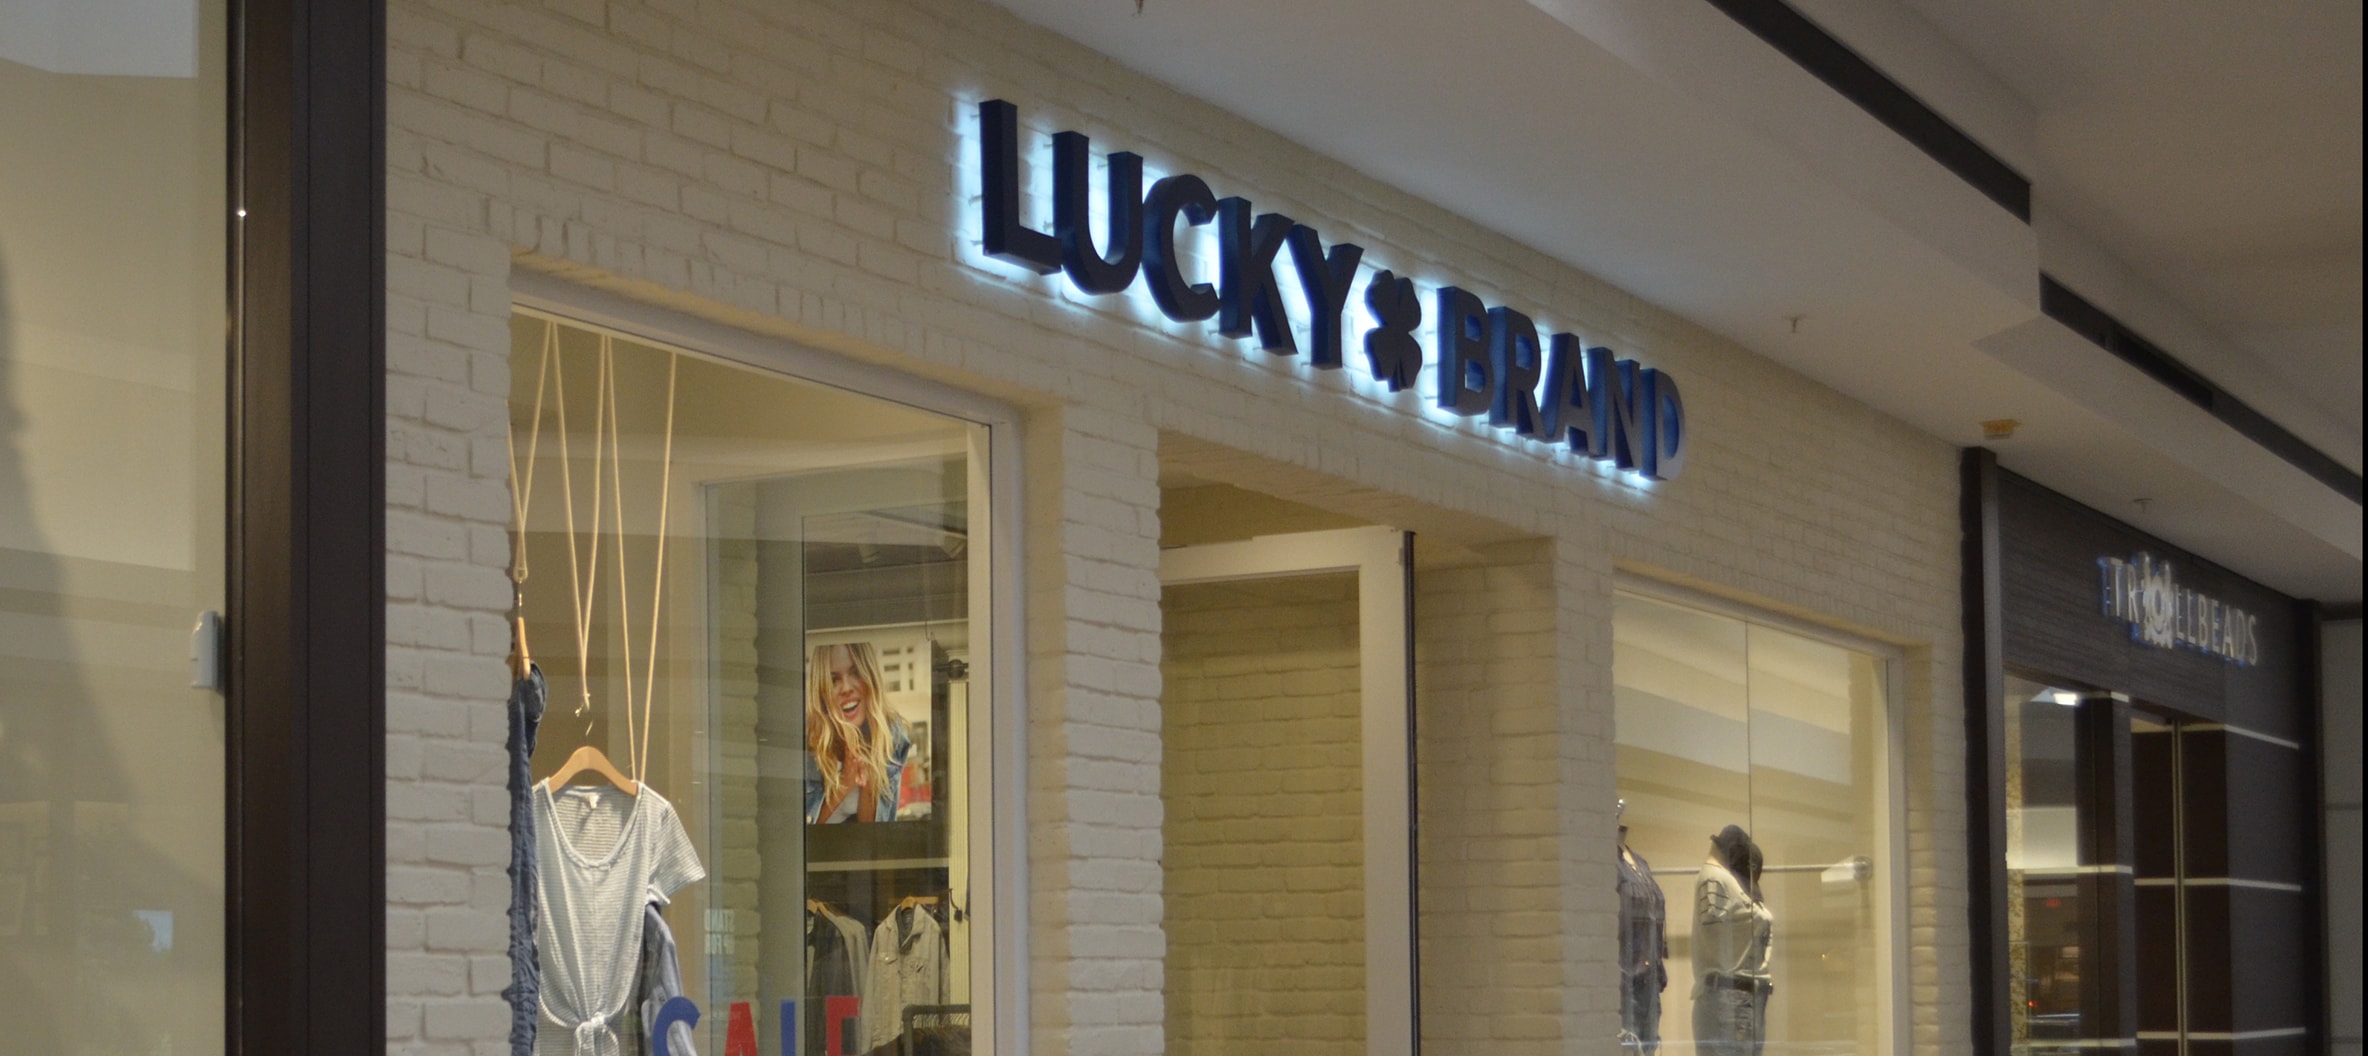 lucky outlet store near me